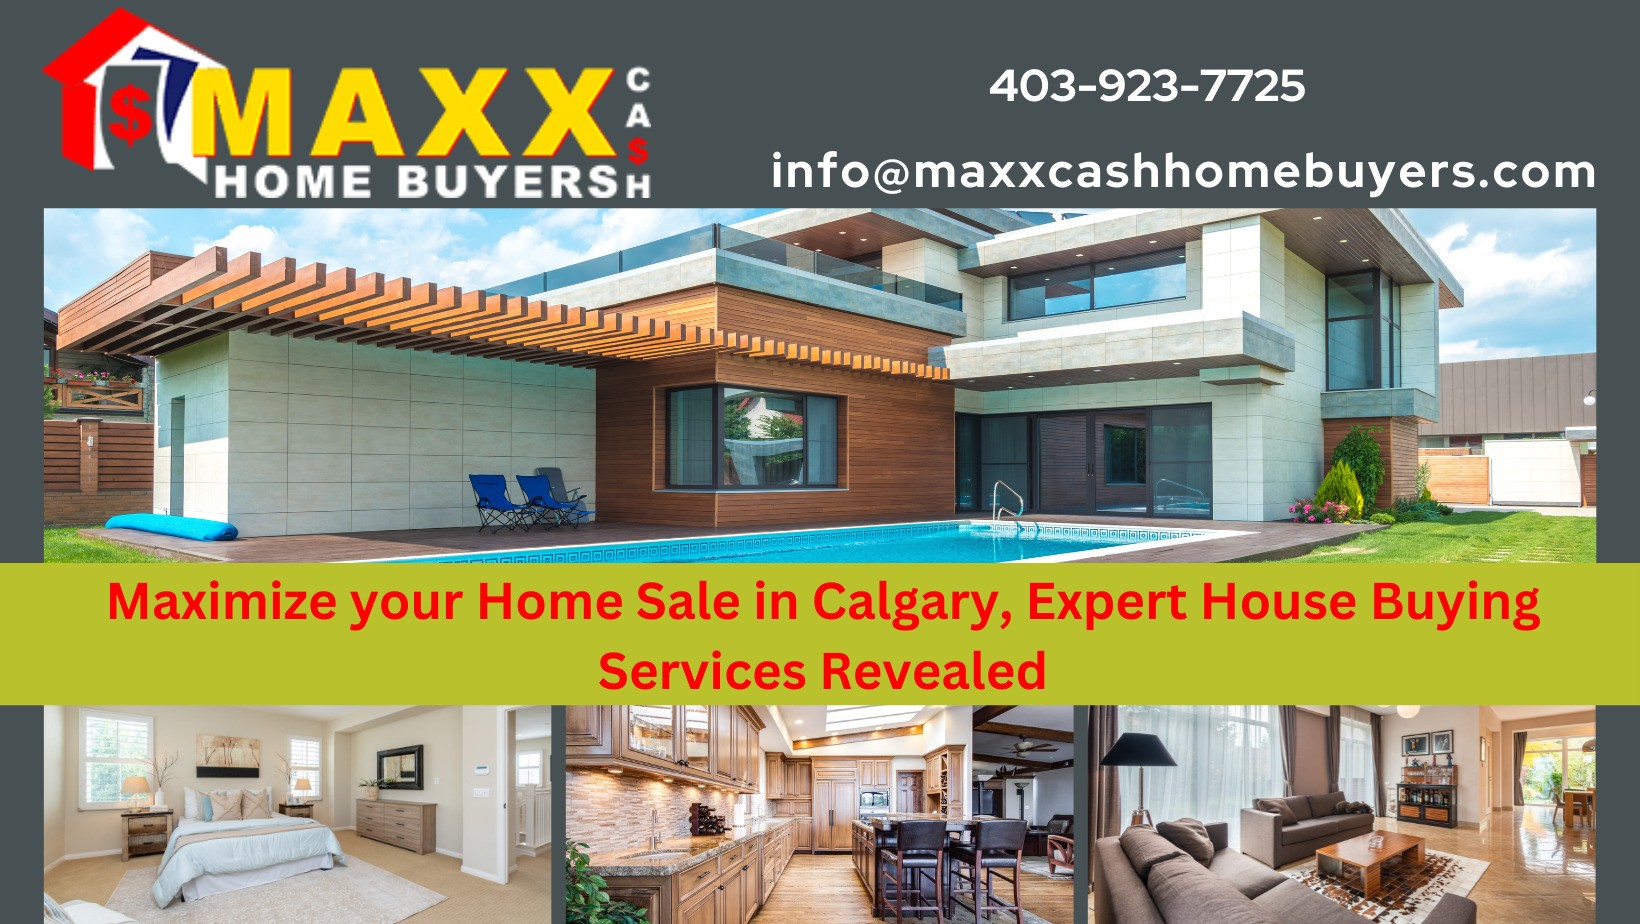 Maximize your Home Sale in Calgary, Expert House Buying Services Revealed